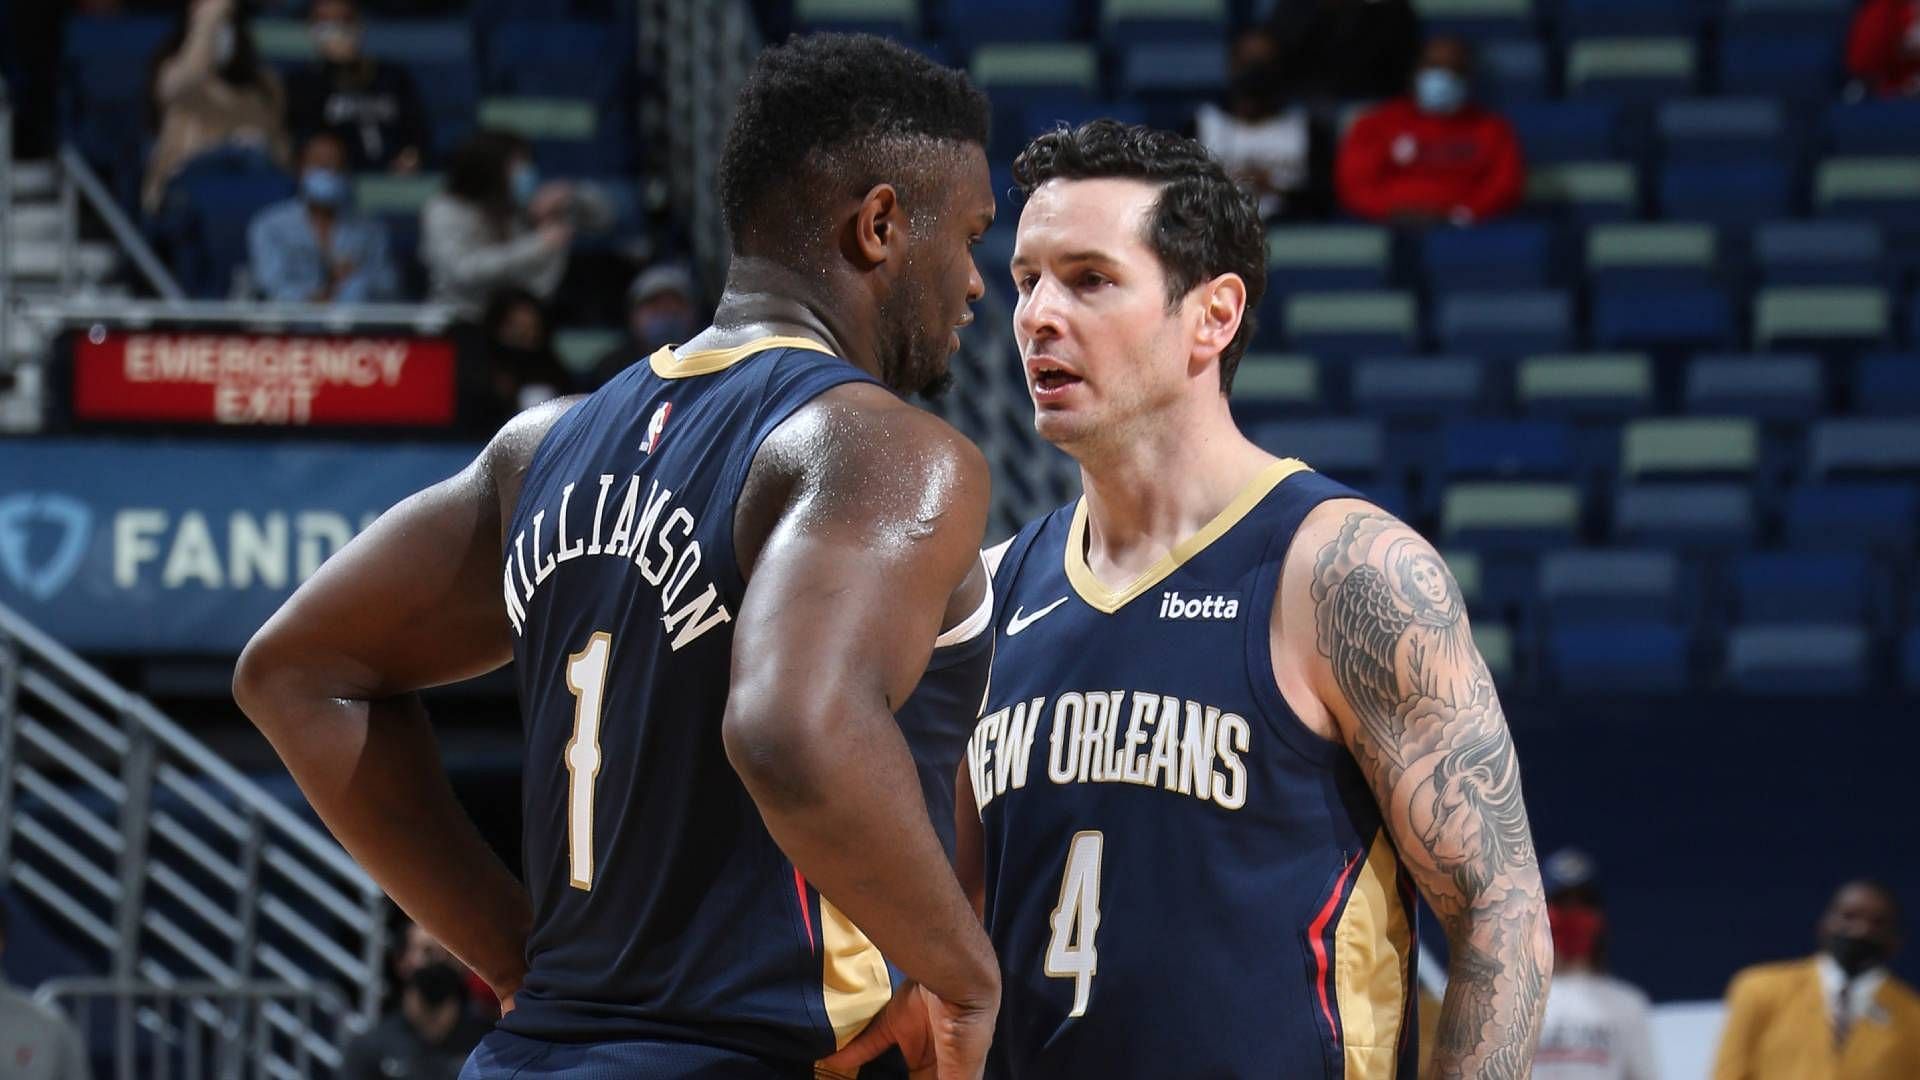 Zion Williamson and JJ Redick as teammates for the New Orleans Pelicans